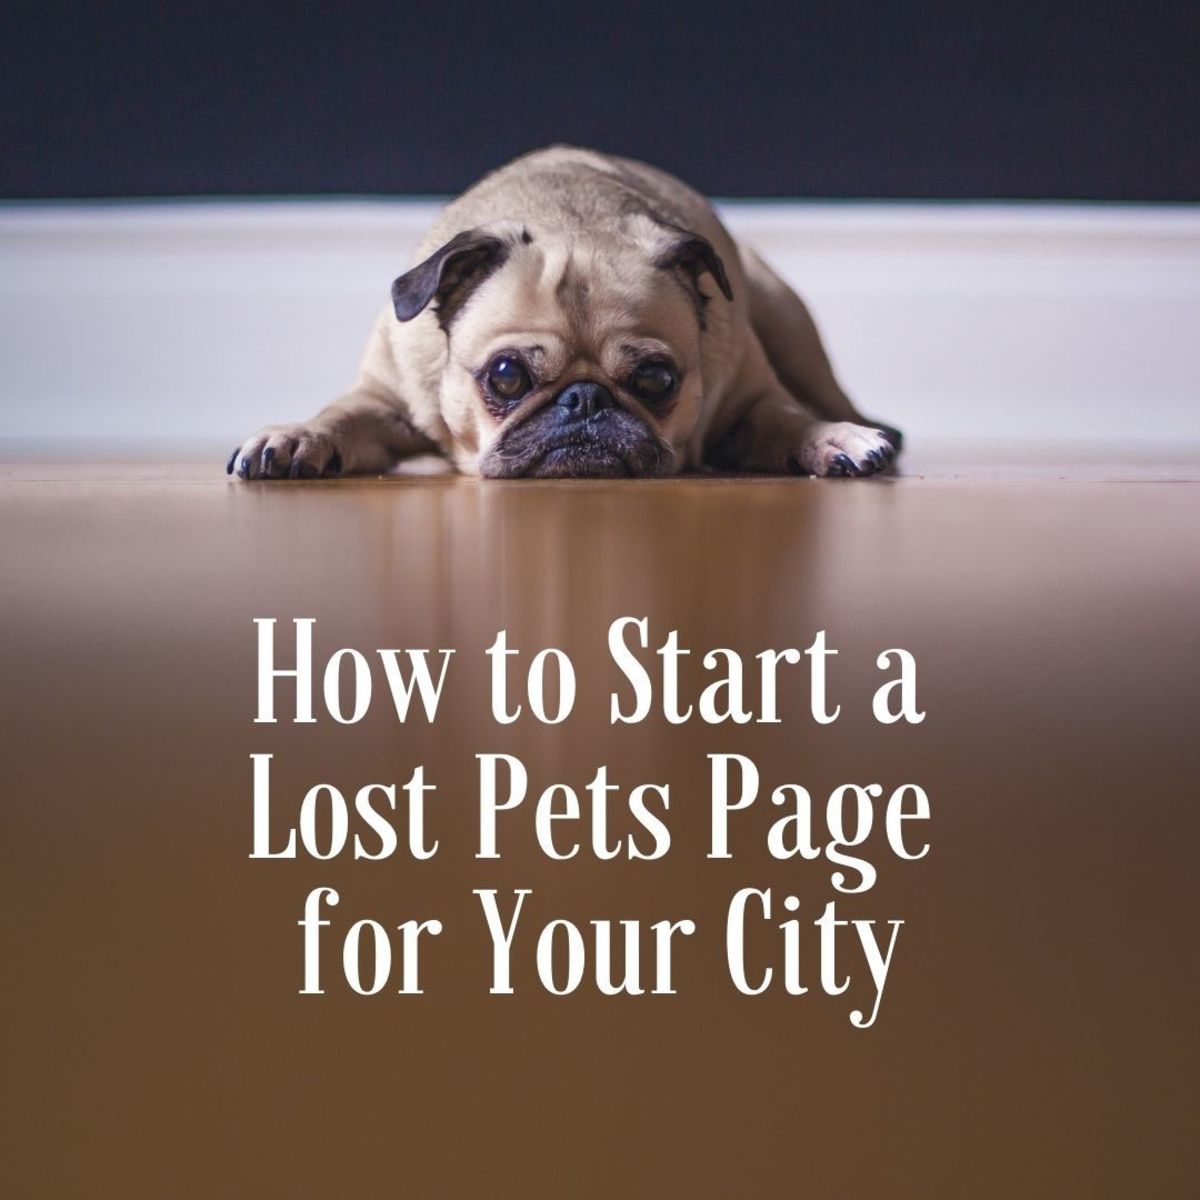 How to Start a Lost Pet Page for Your City in 6 Easy Steps